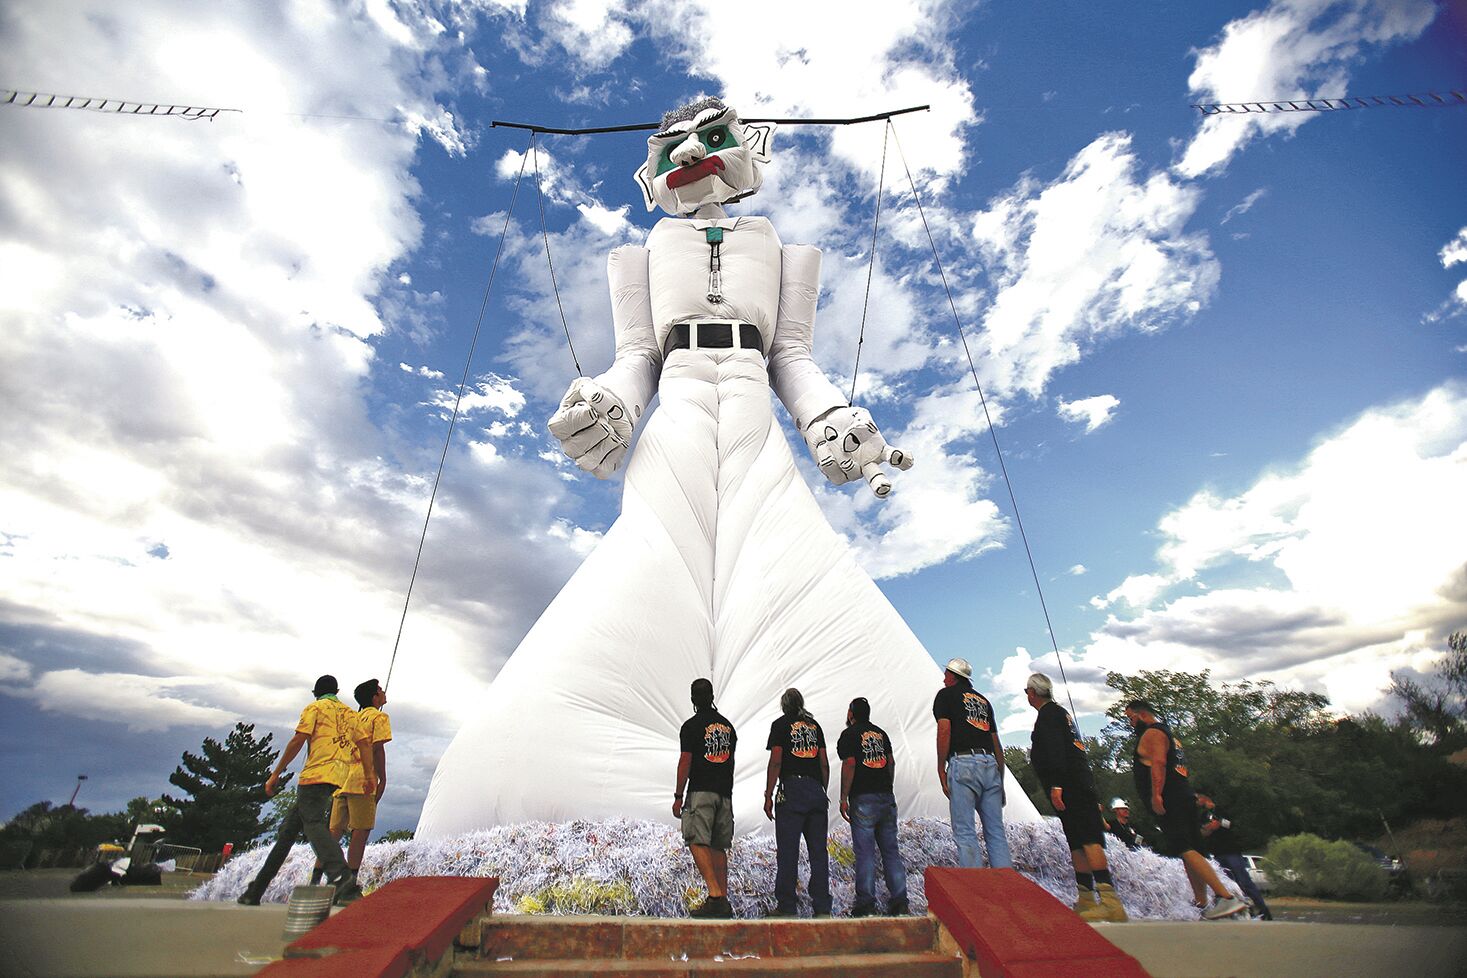 Fired up: Zozobra 2020 goes crowdless | Pasatiempo